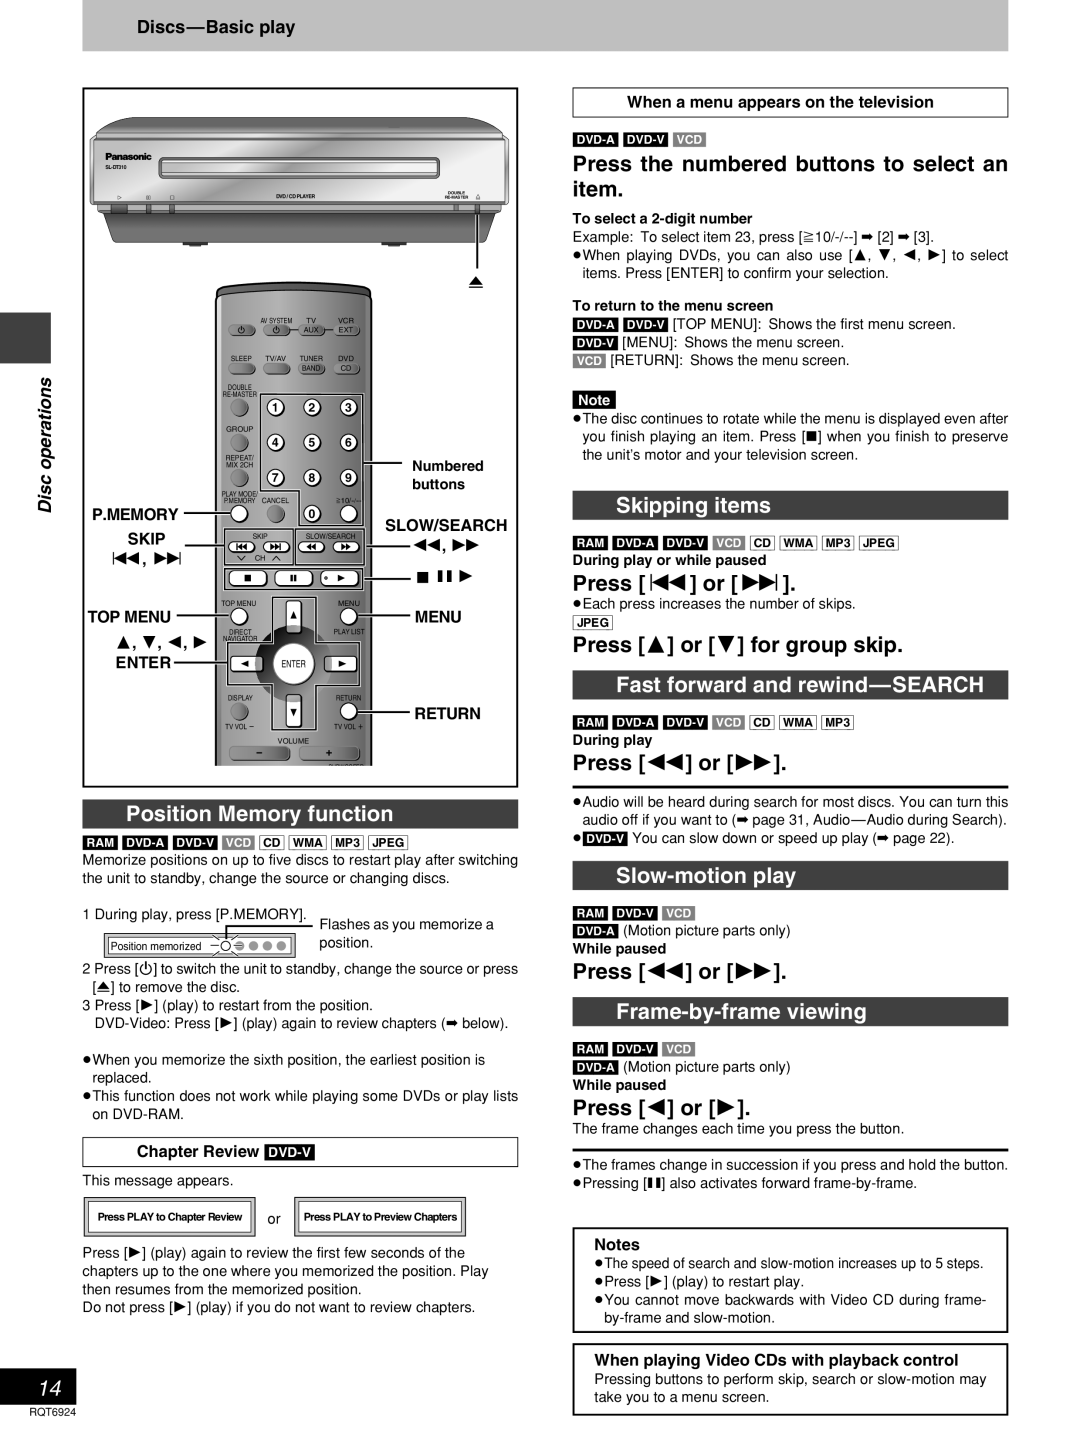 Panasonic SC-DT310 Position Memory function, Press the numbered buttons to select an item, Skipping items, Press or, Disc 